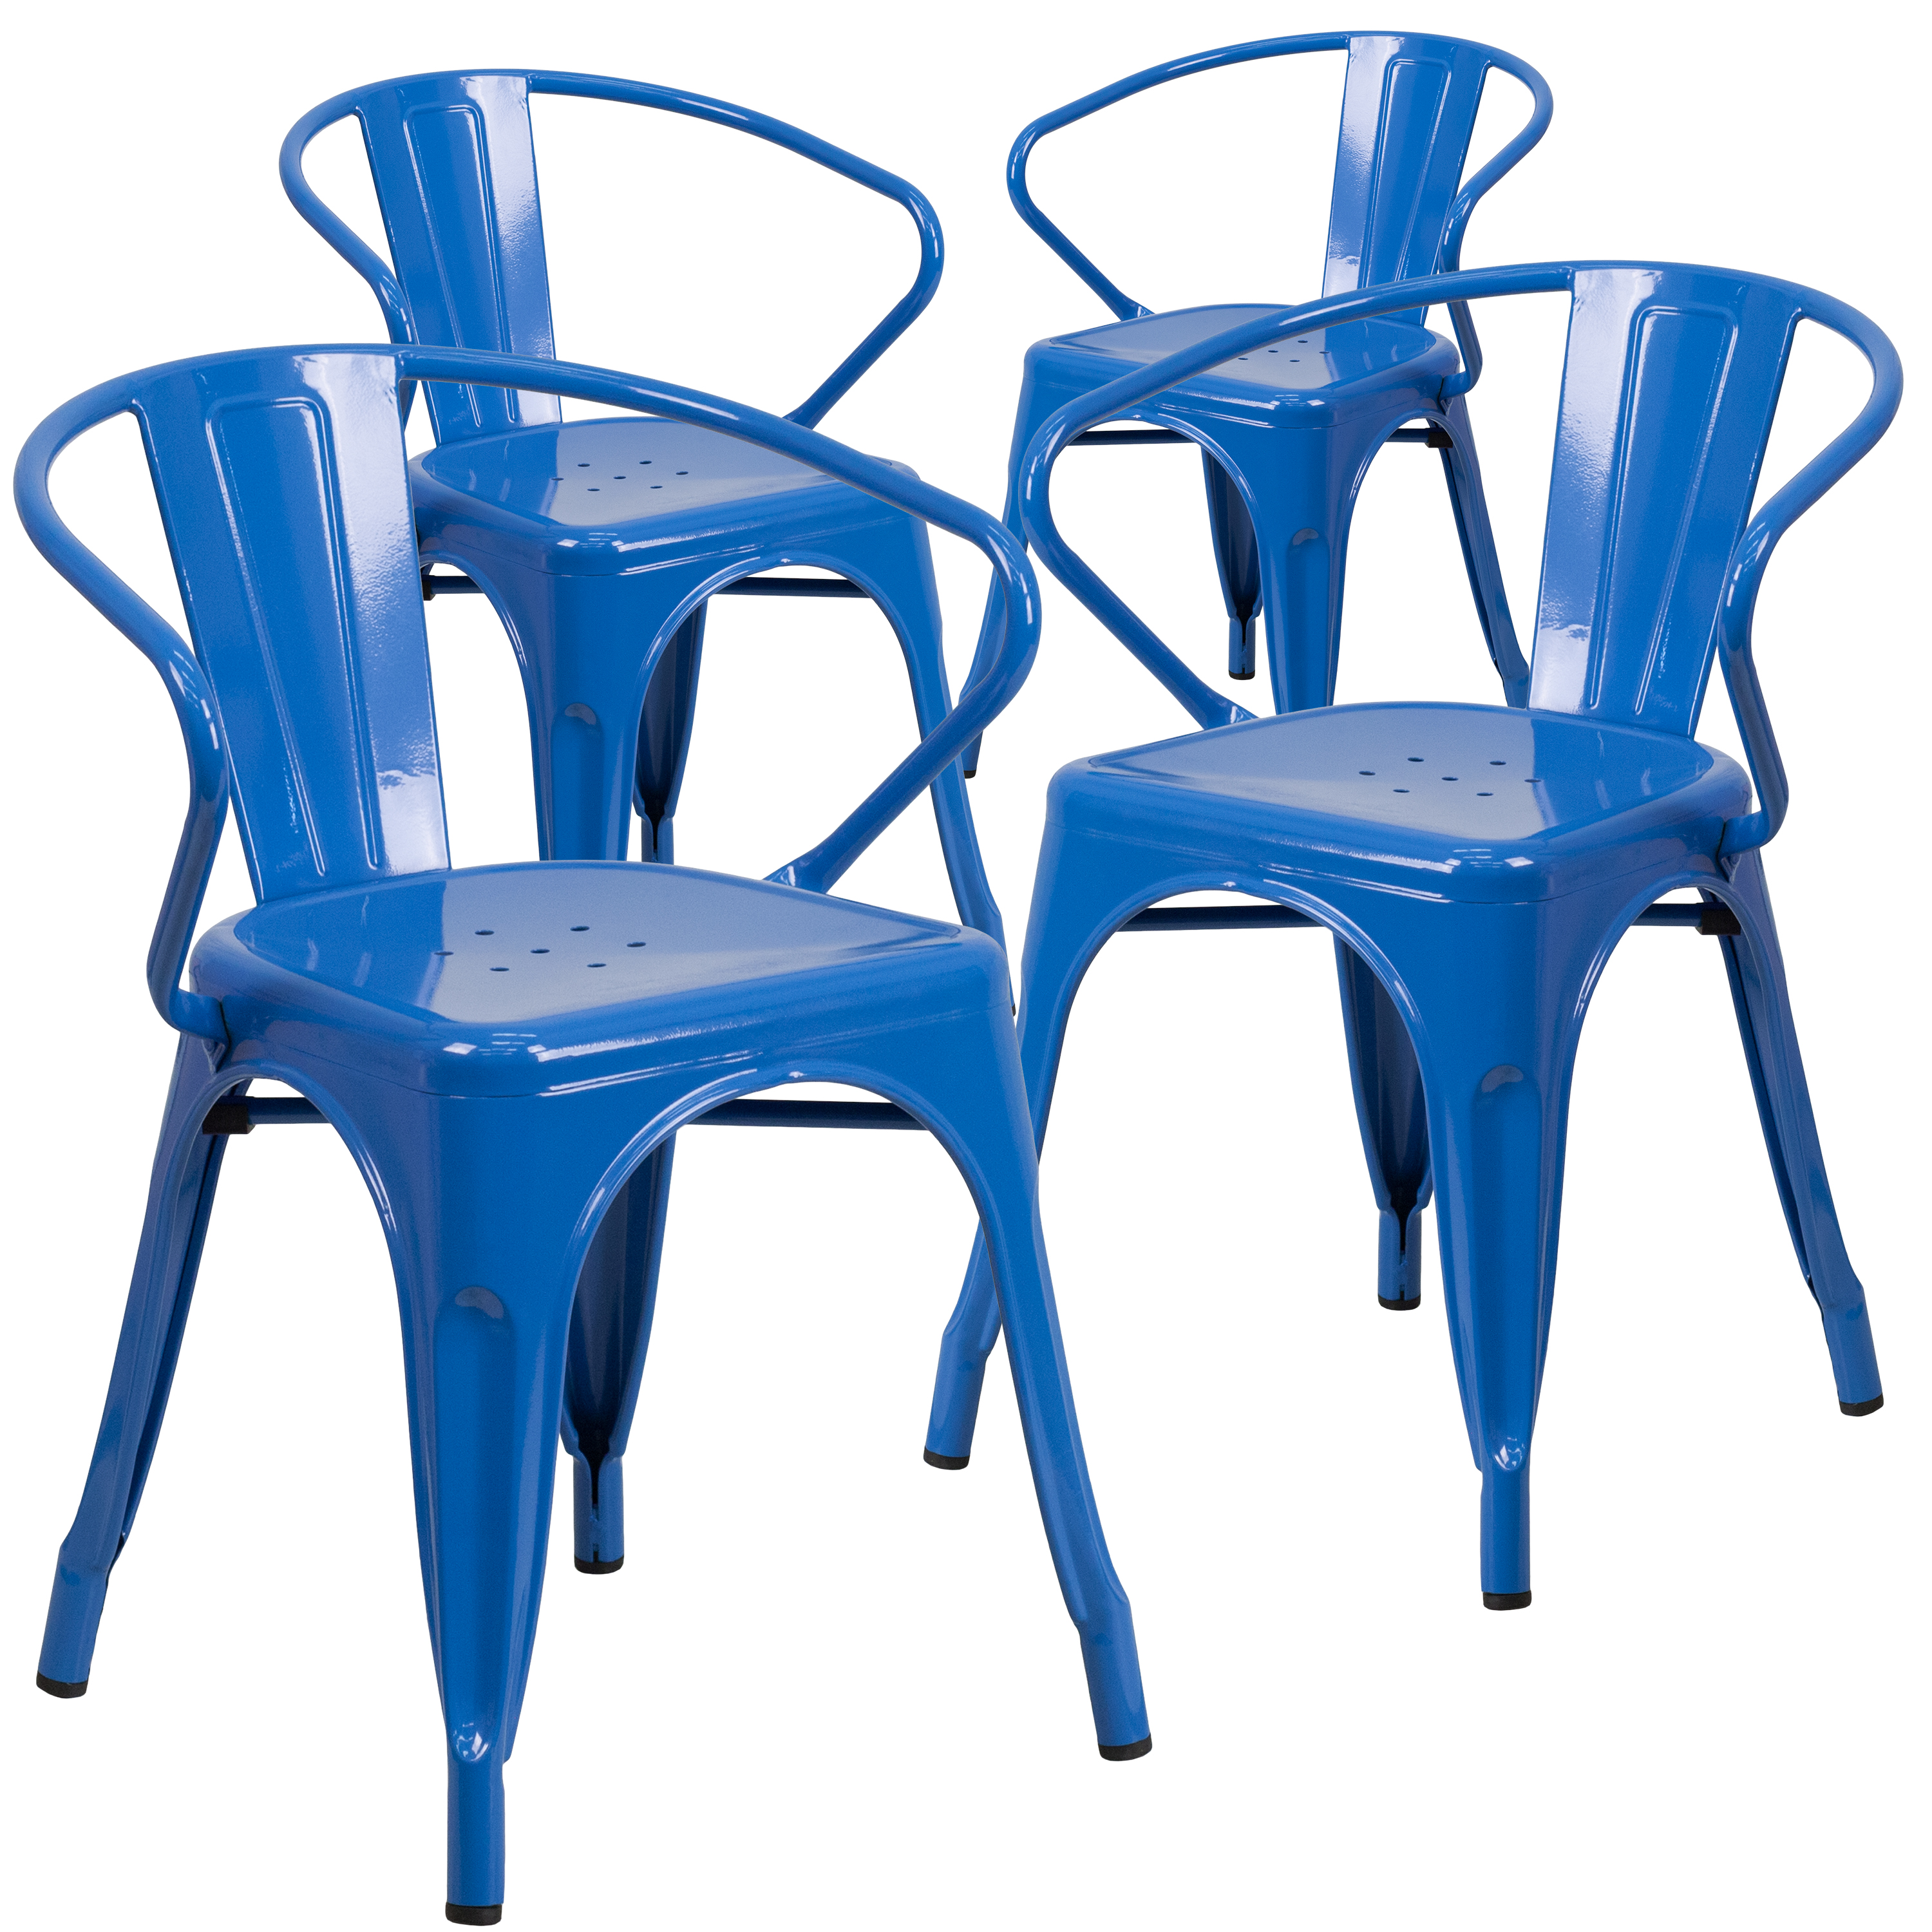 BizChair Commercial Grade 4 Pack Blue Metal Indoor-Outdoor Chair with Arms - image 2 of 14